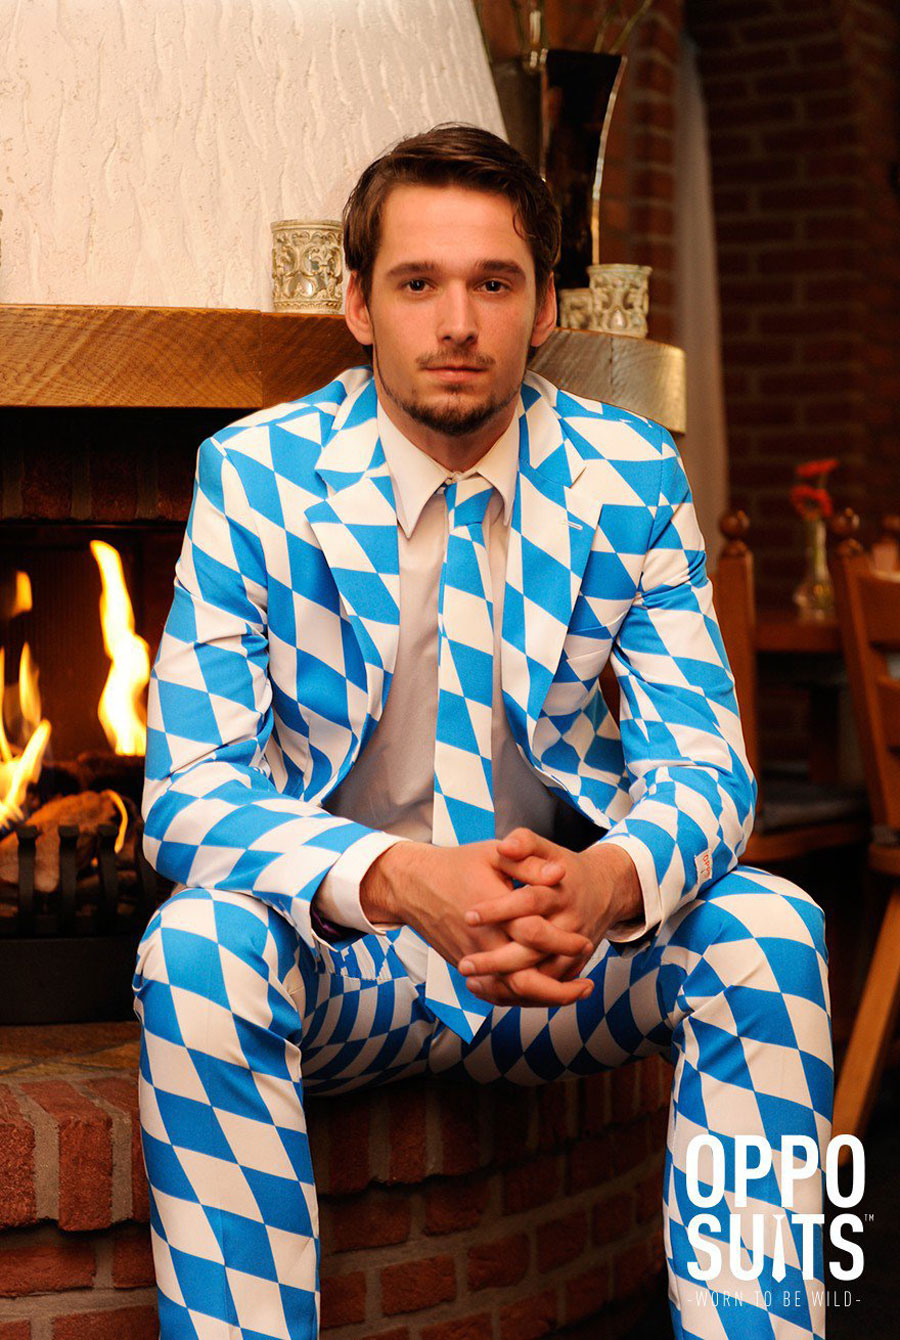 The OppoSuits